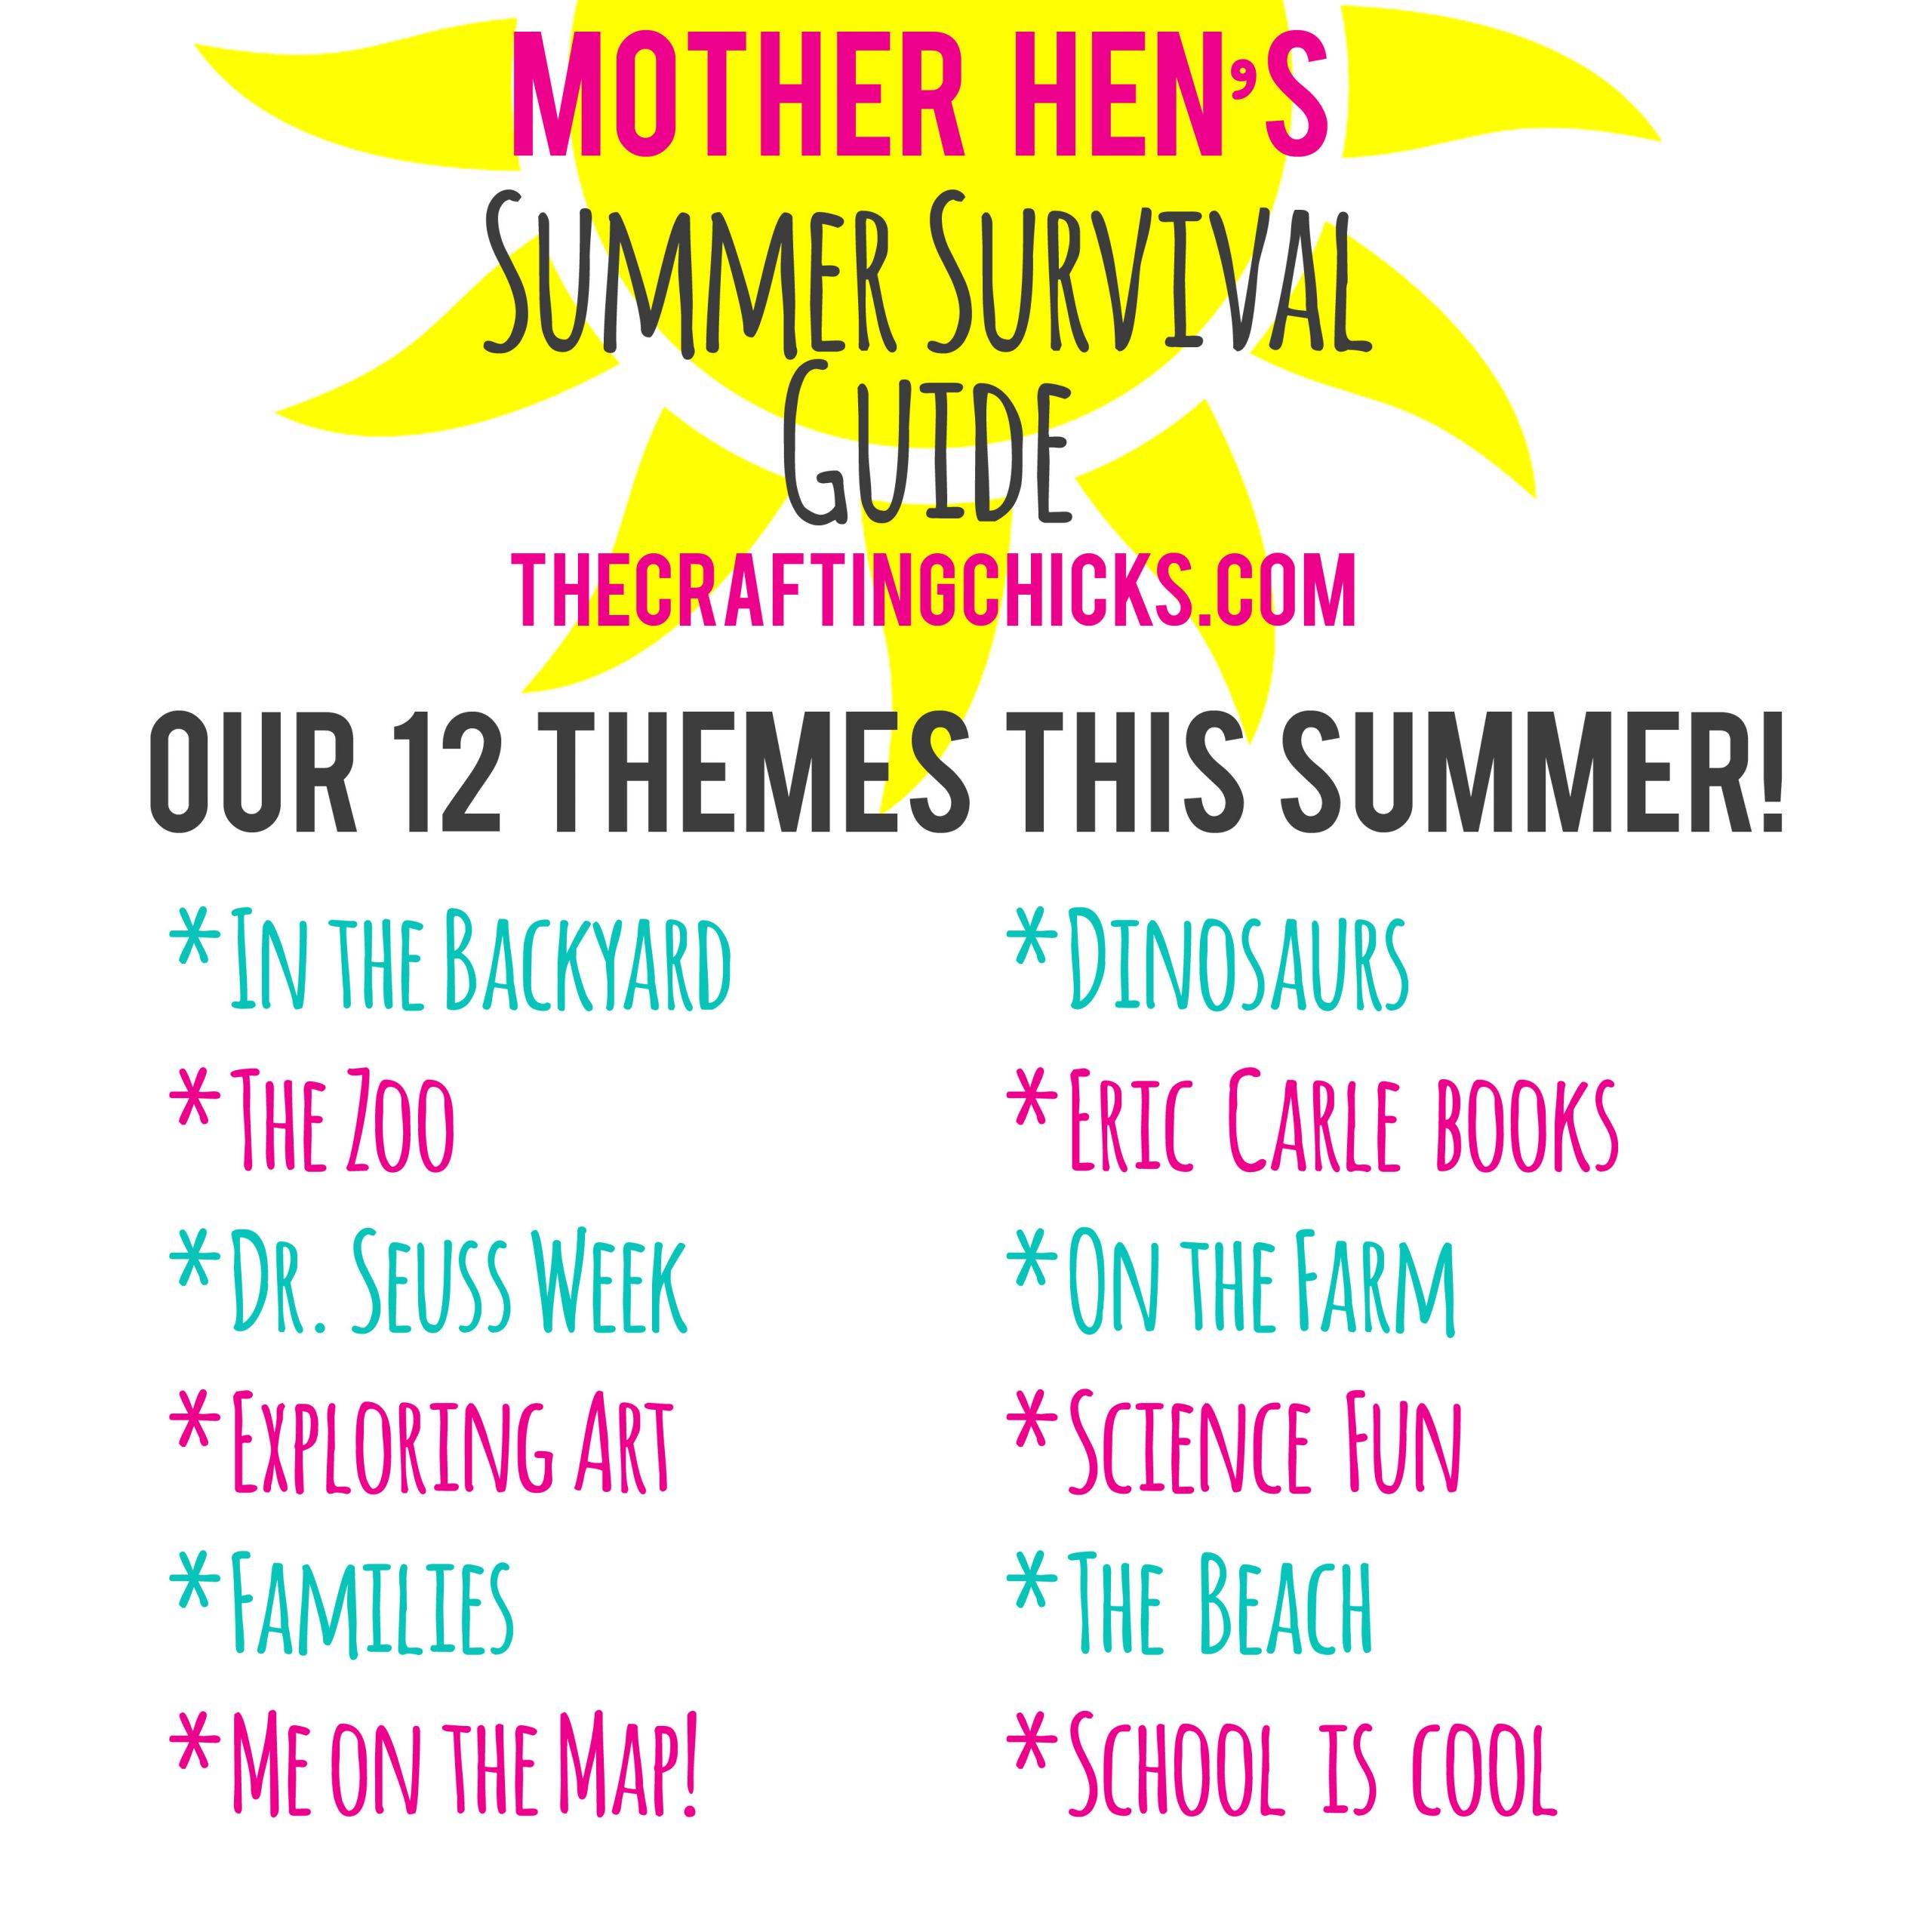 Summer Camp Ideas
 Mother Hen Summer Survival Guide 2016 The Crafting Chicks